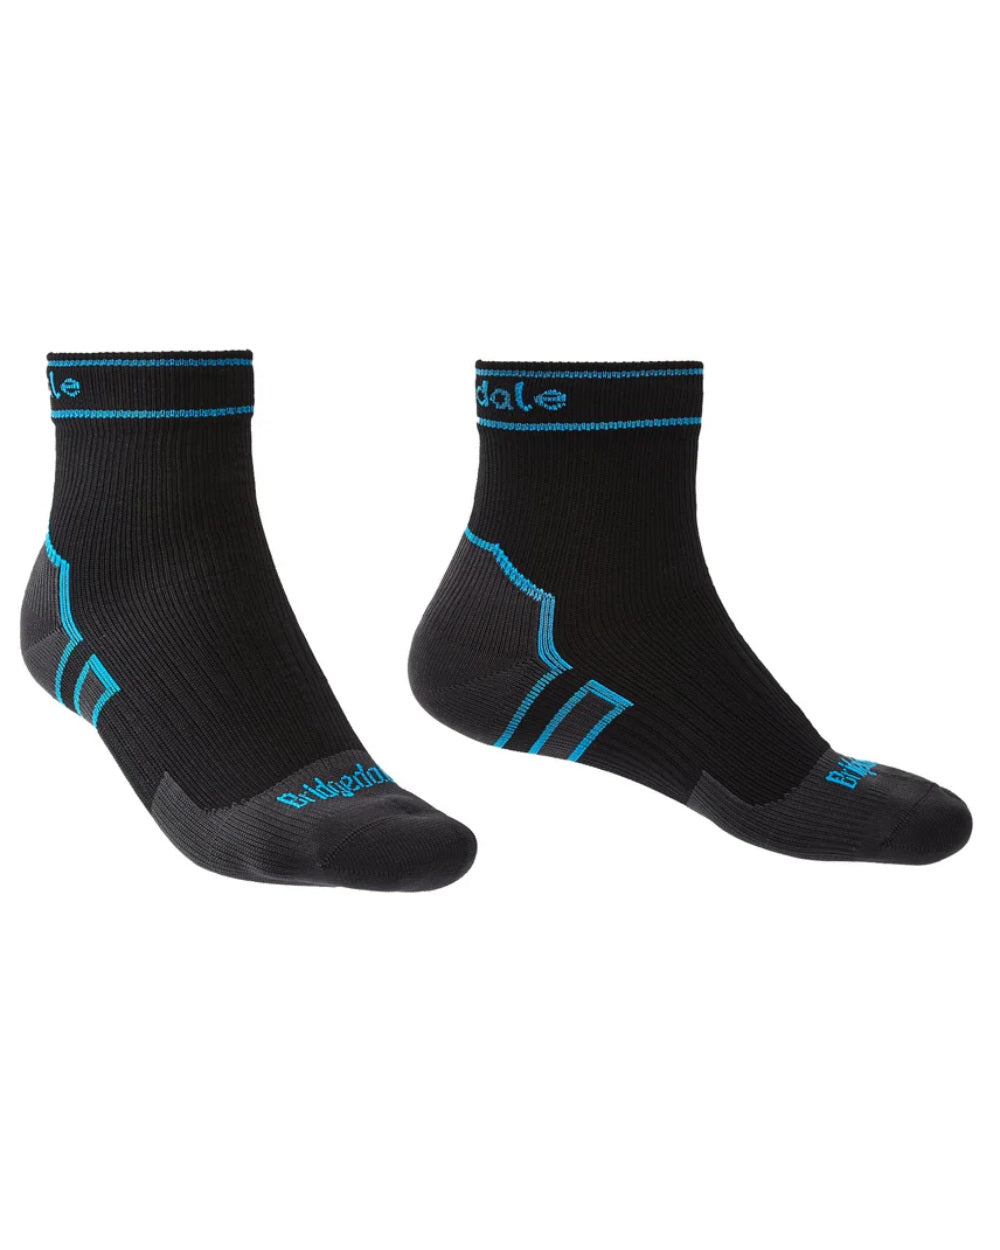 Black Coloured Bridgedale StormSock Midweight Ankle Socks On A White Background